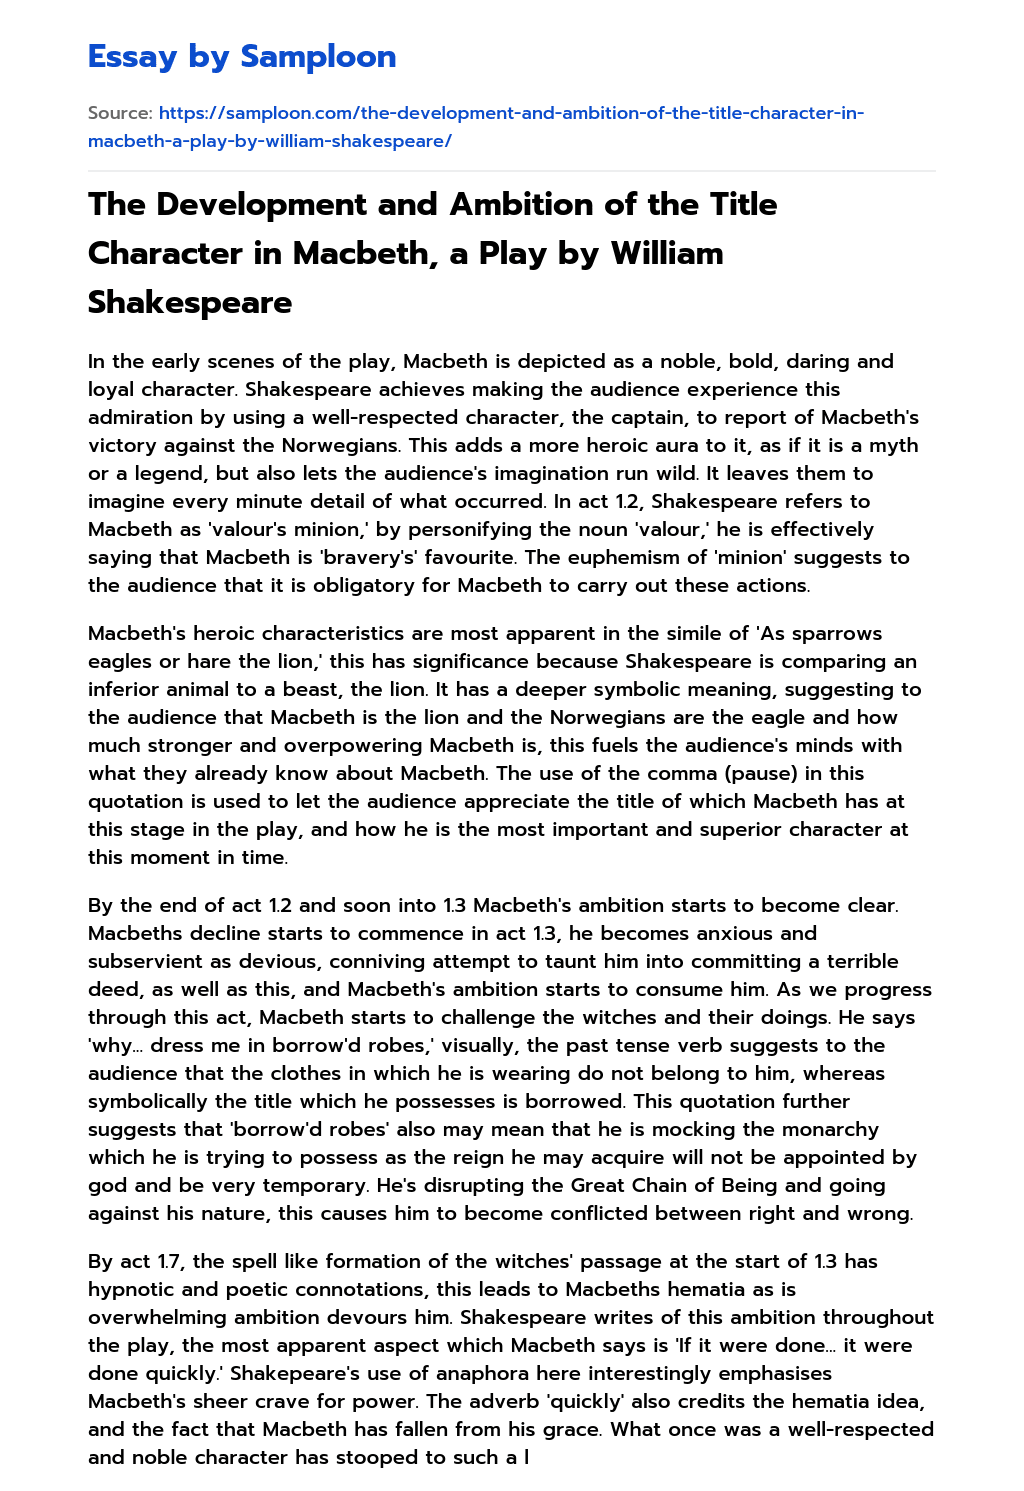 The Development and Ambition of the Title Character in Macbeth, a Play by William Shakespeare essay